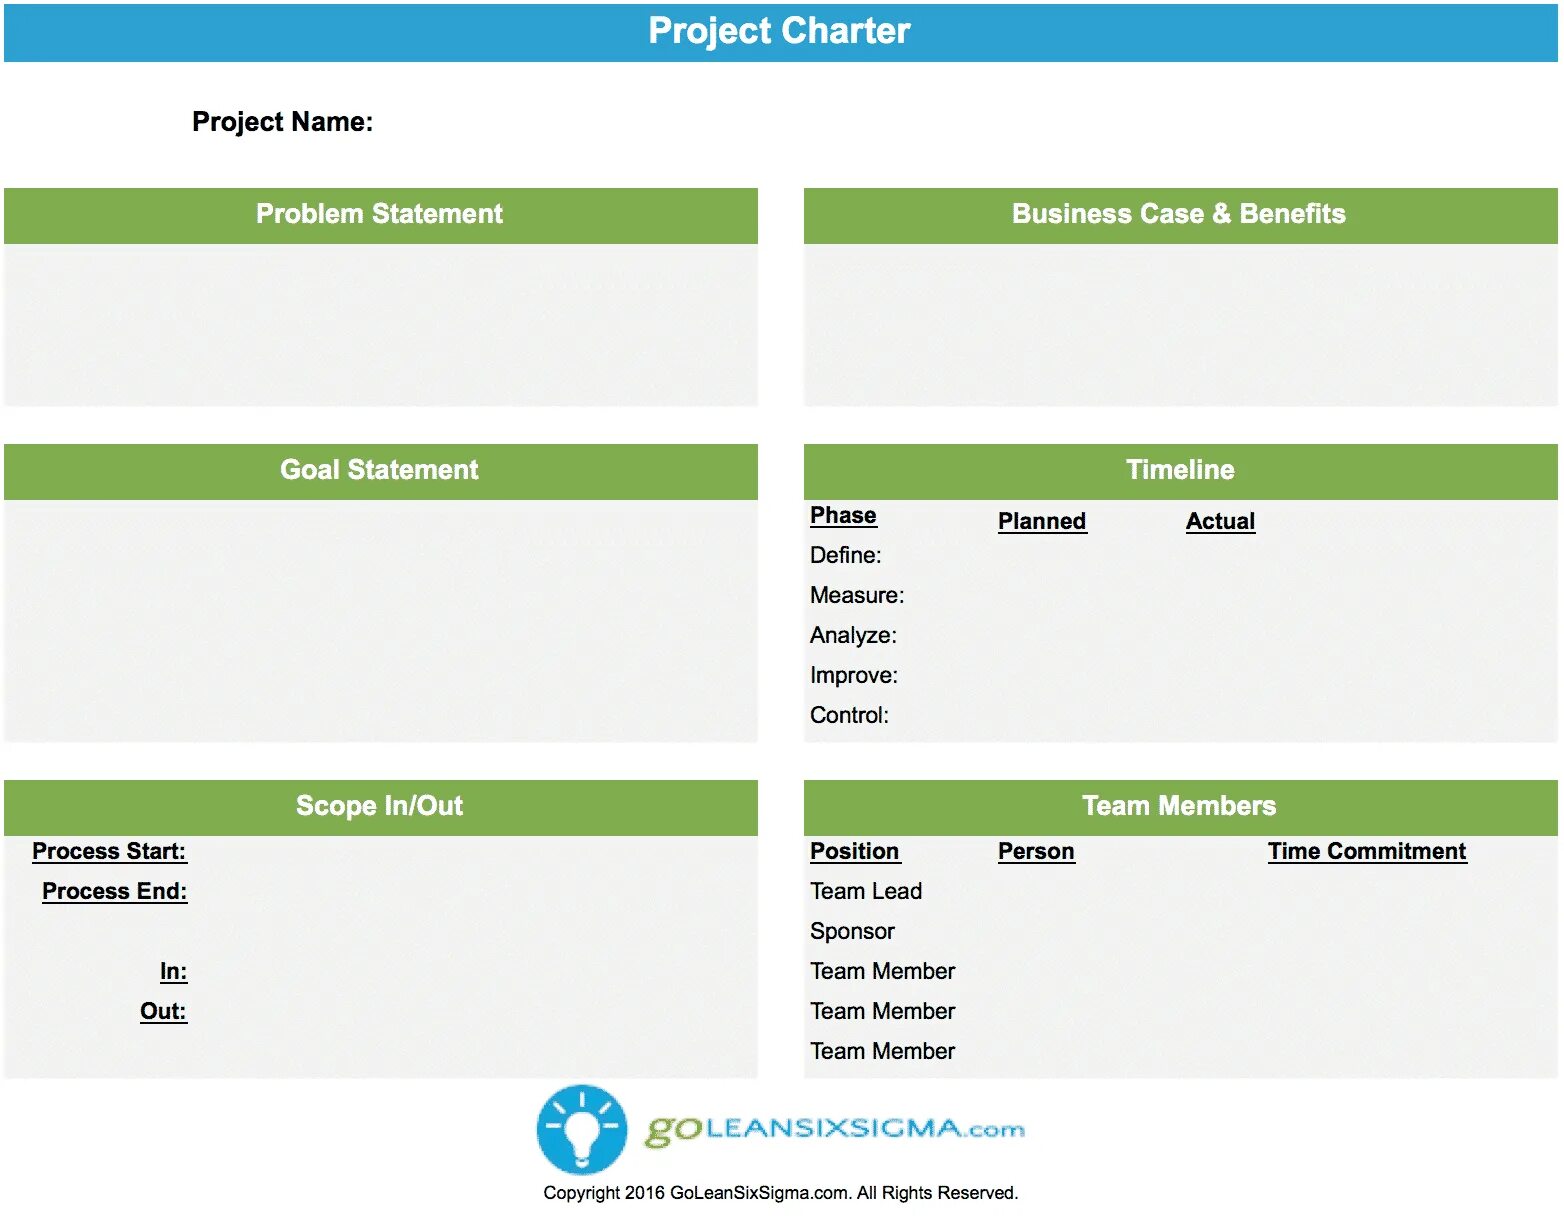 Samples program. Project Charter. Project Charter Template. Project Charter example. Project Charter пример.